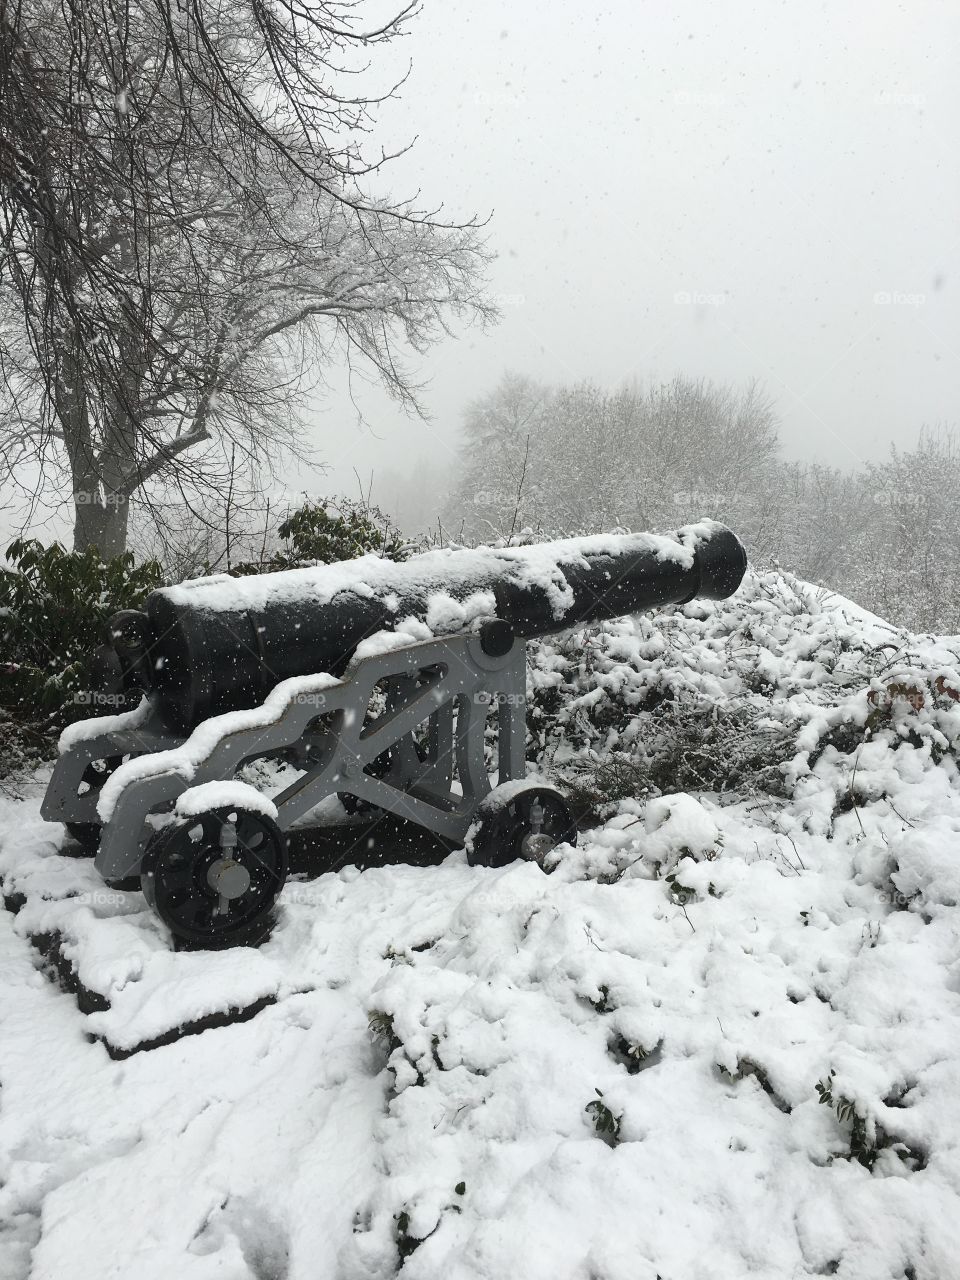 Cannon in the snow, England